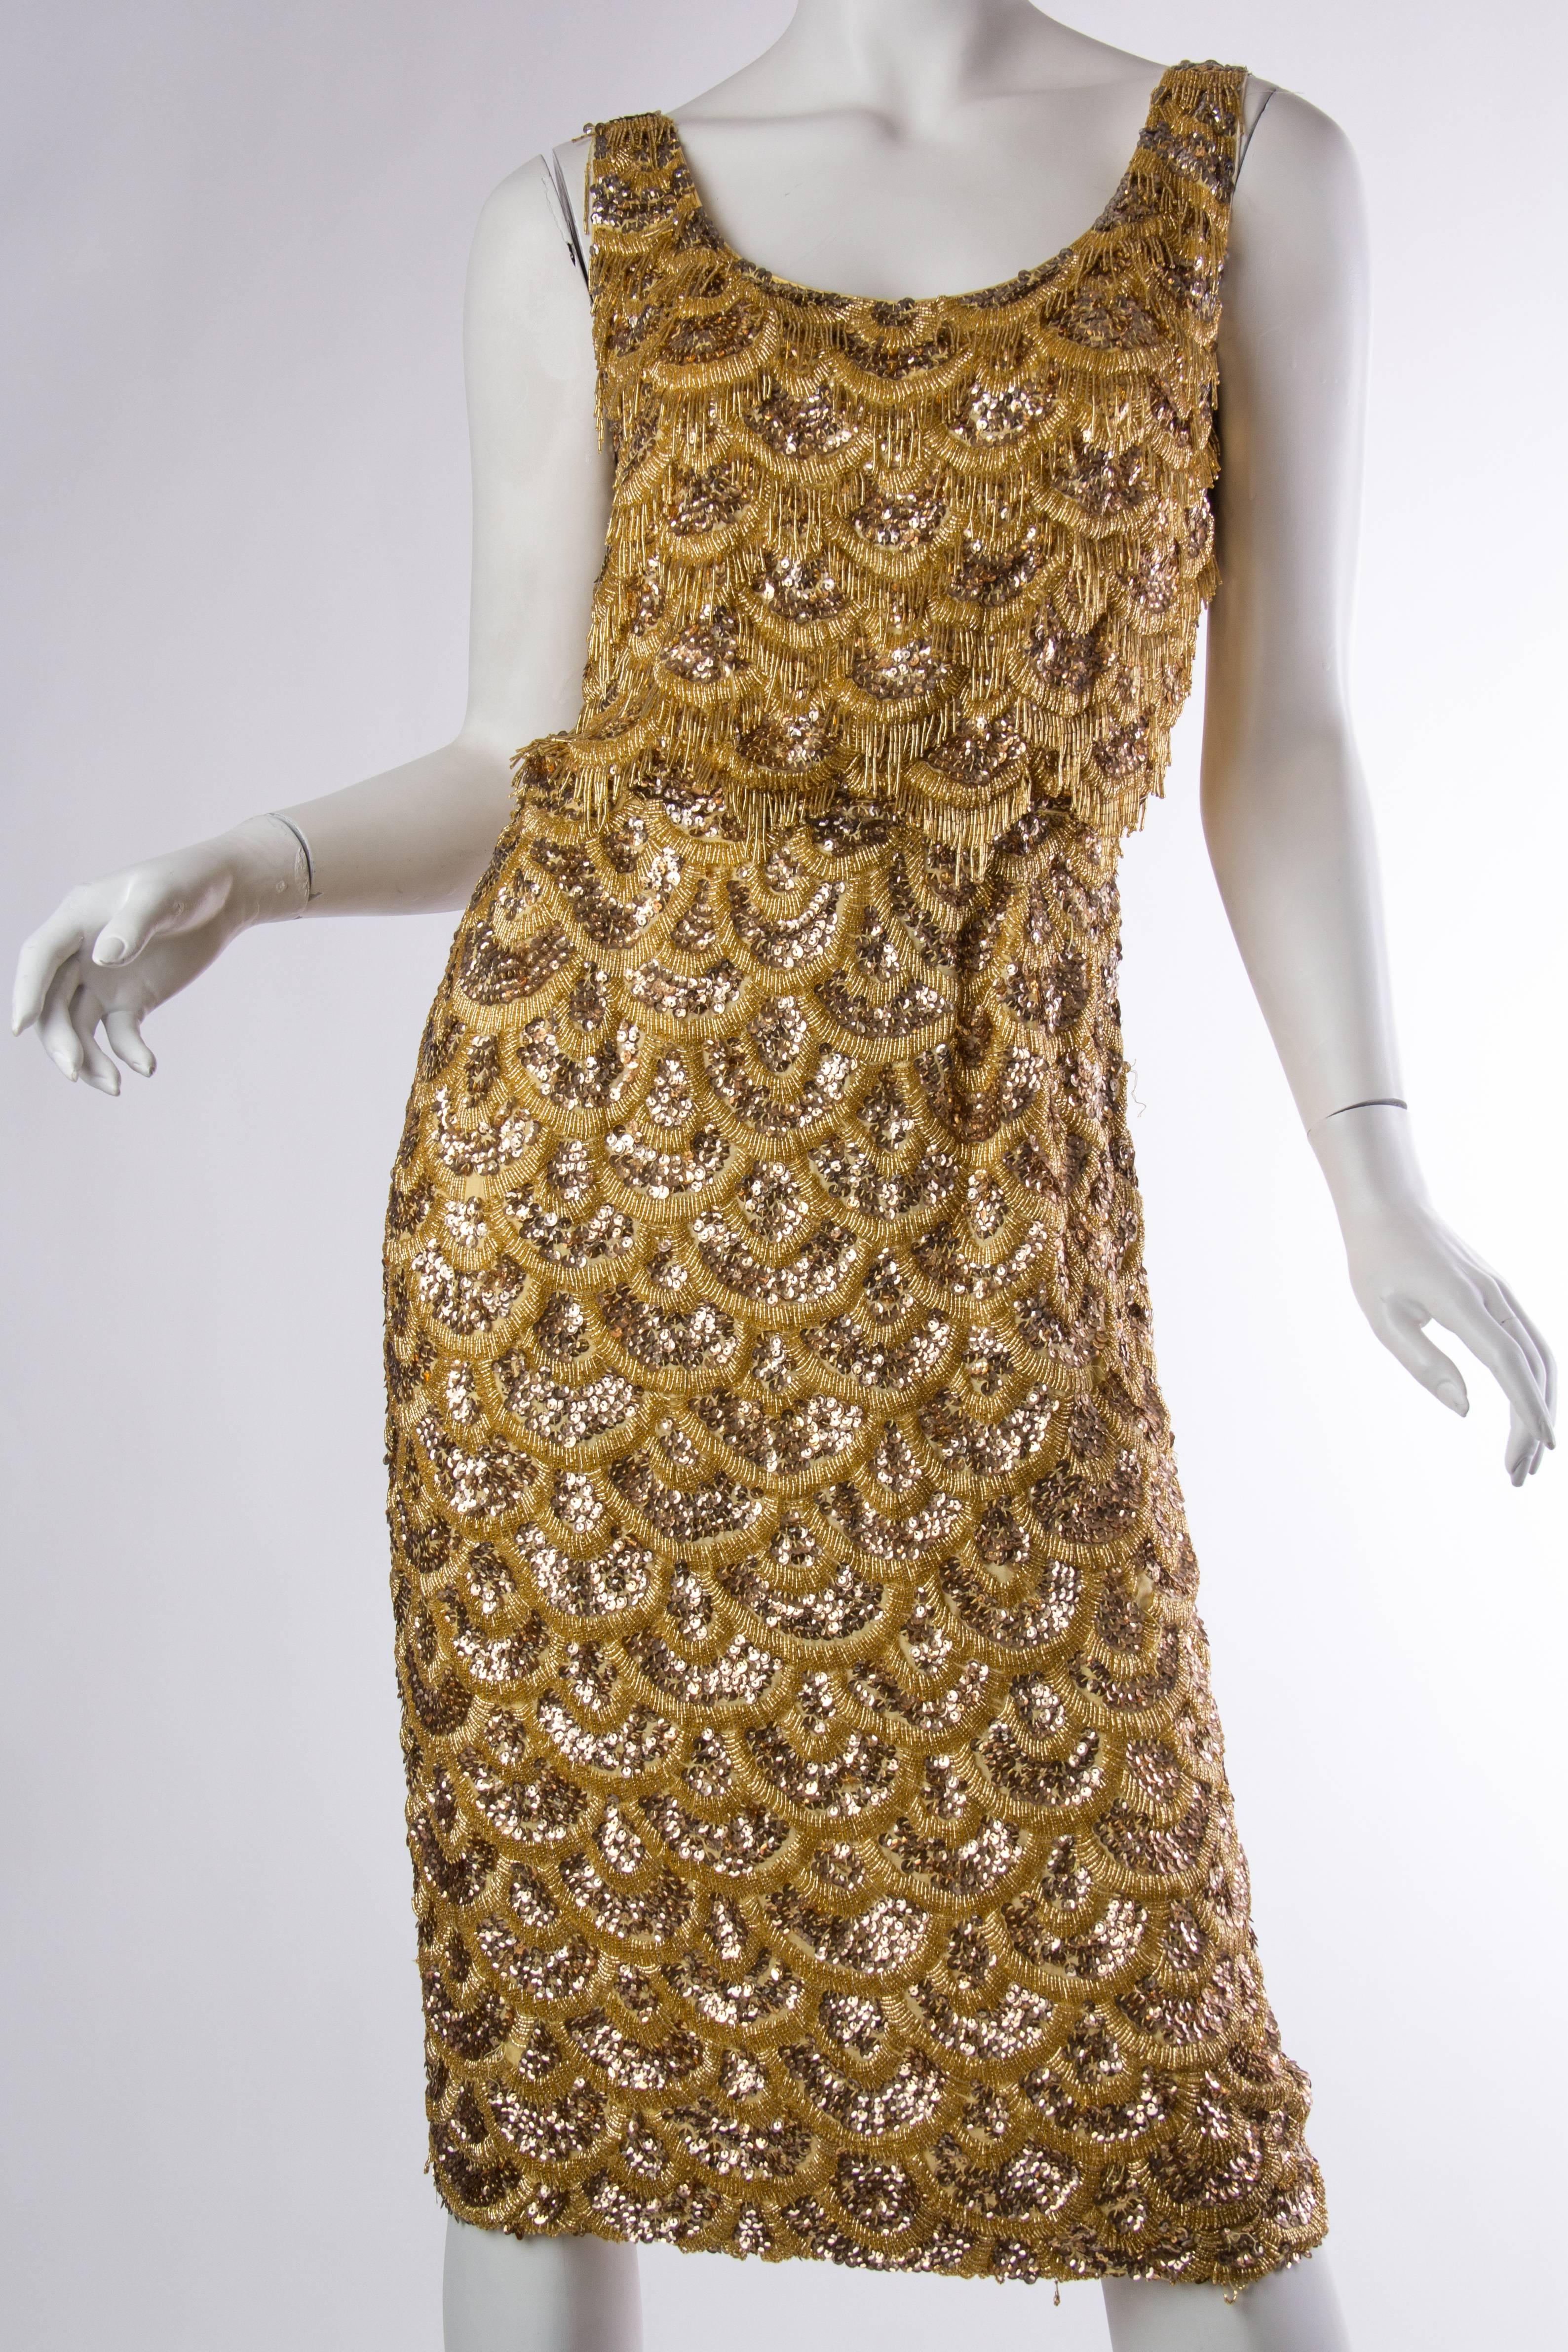 Early 1960s Beaded Gold Fringe Bombshell Mermaid Dress. There are some minor areas of loose beads as shown. We can have them all fixed and re-beaded for the buyer for an additional $300. Overall though this very rare dress is phenomenal and in very